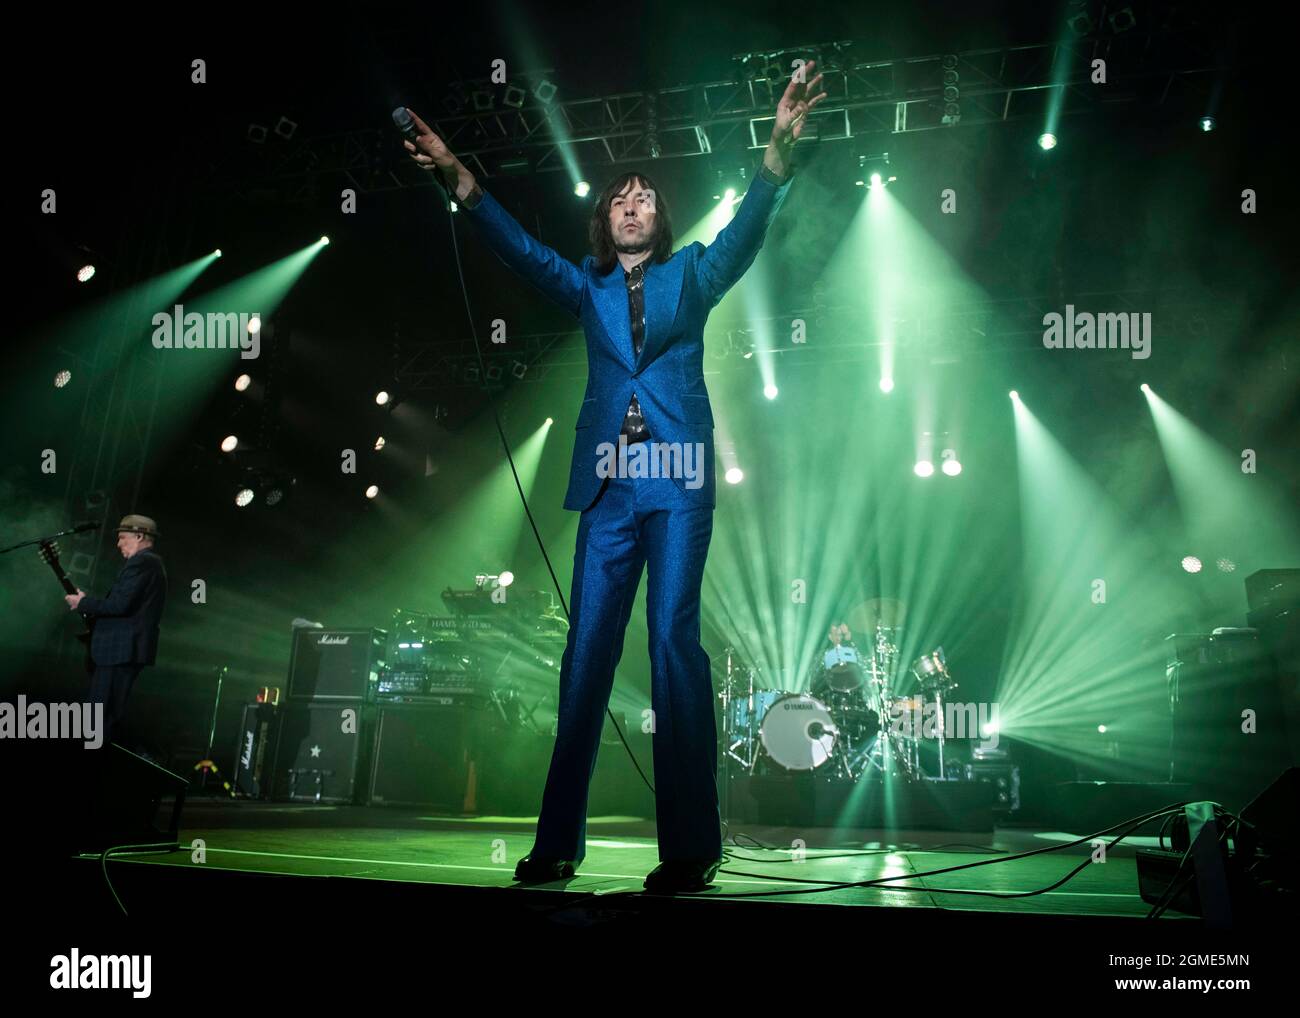 Newport, Isle of Wight, UK, Friday, 17th September 2021 Bobbie Gillespie from Primal Scream performs live at the Isle of Wight festival Seaclose Park. Credit: DavidJensen / Empics Entertainment / Alamy Live News Stock Photo